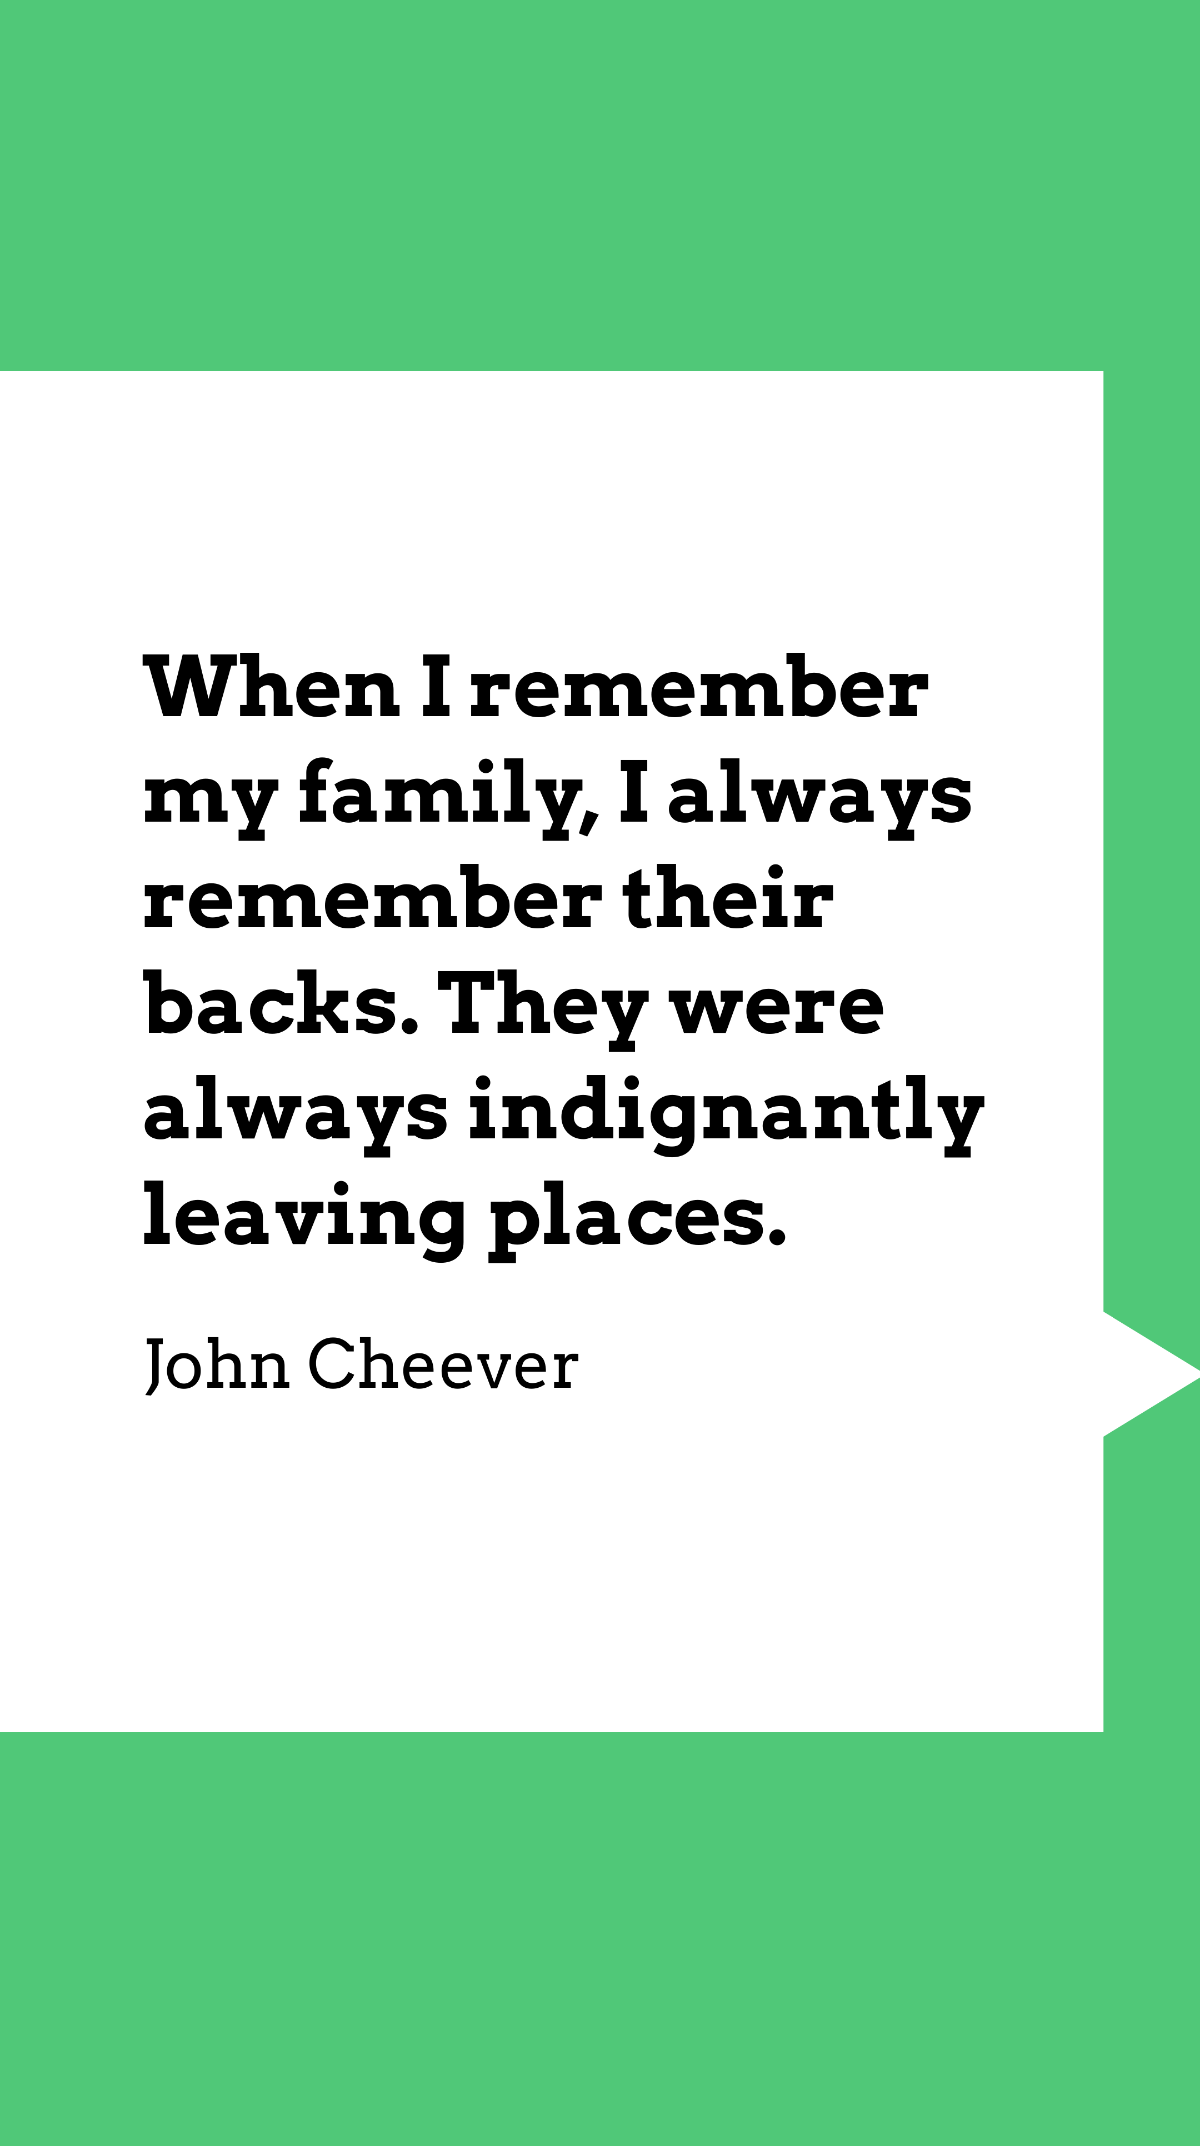 John Cheever - When I remember my family, I always remember their backs. They were always indignantly leaving places. Template